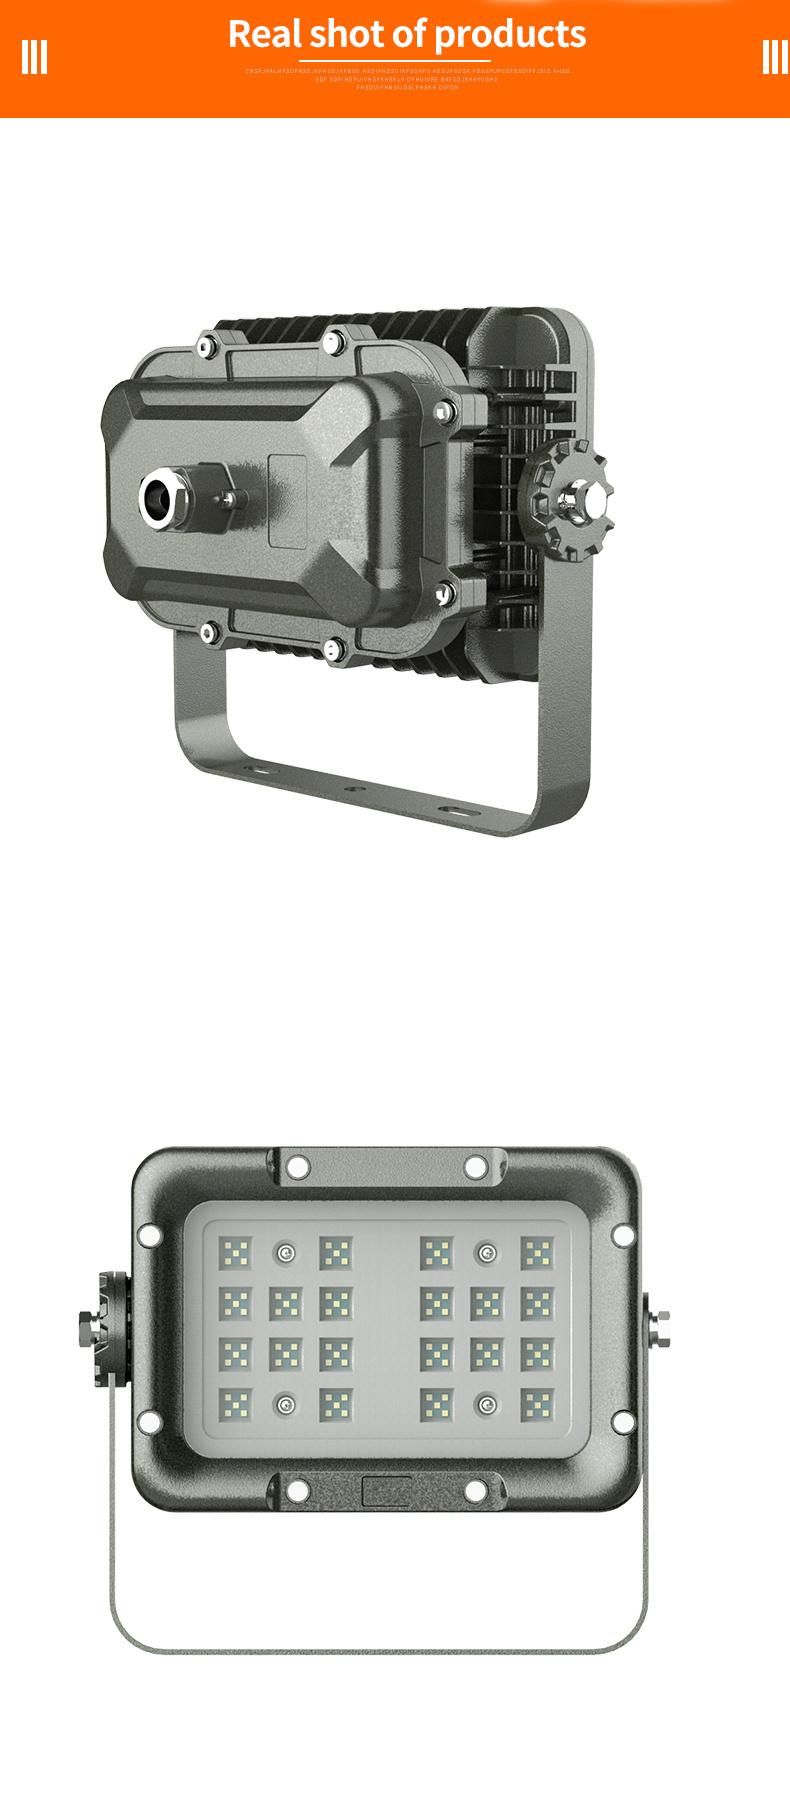 Atex 120 Lm/W Ik08 IP66 Outdoor Explosion Proof LED Floodlight 100W Industrial Exproof Light